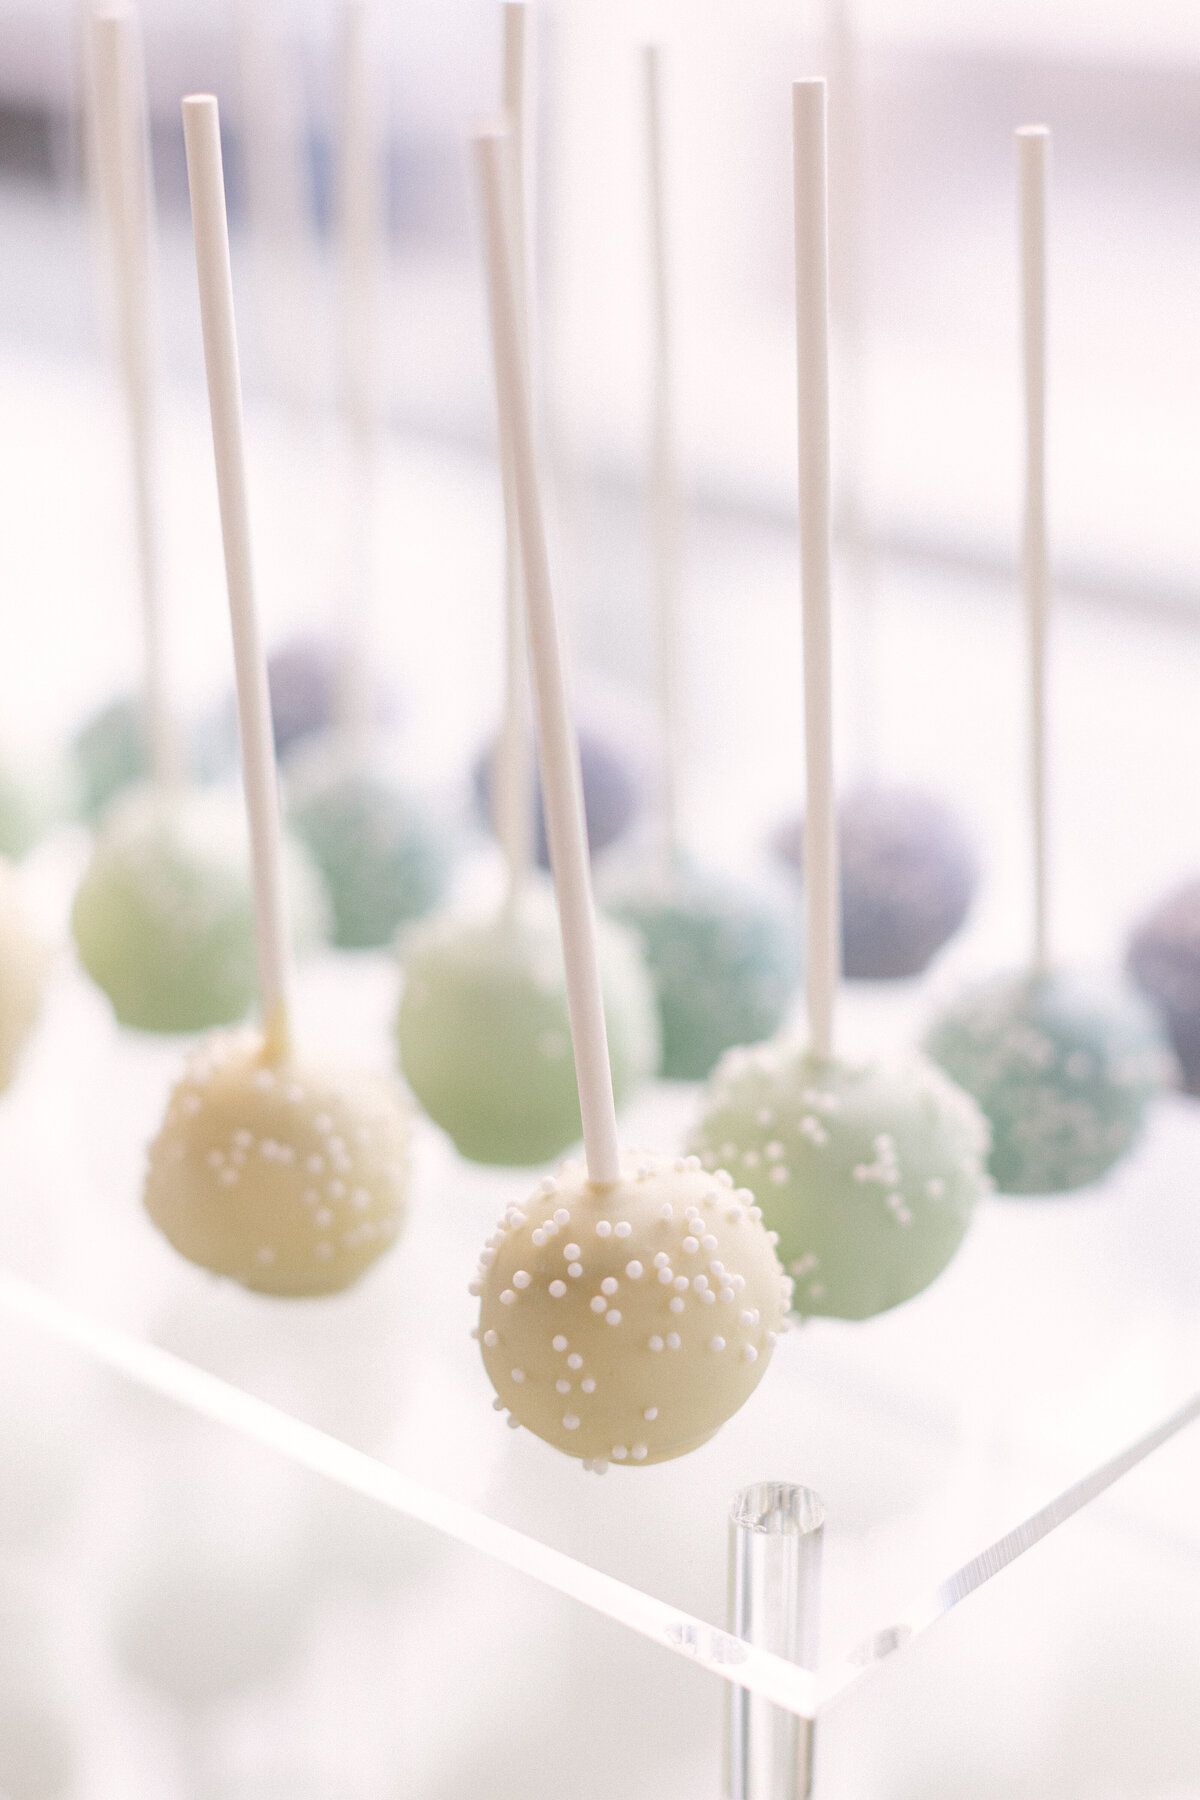 Cake pops TTWD NYC Party Planner